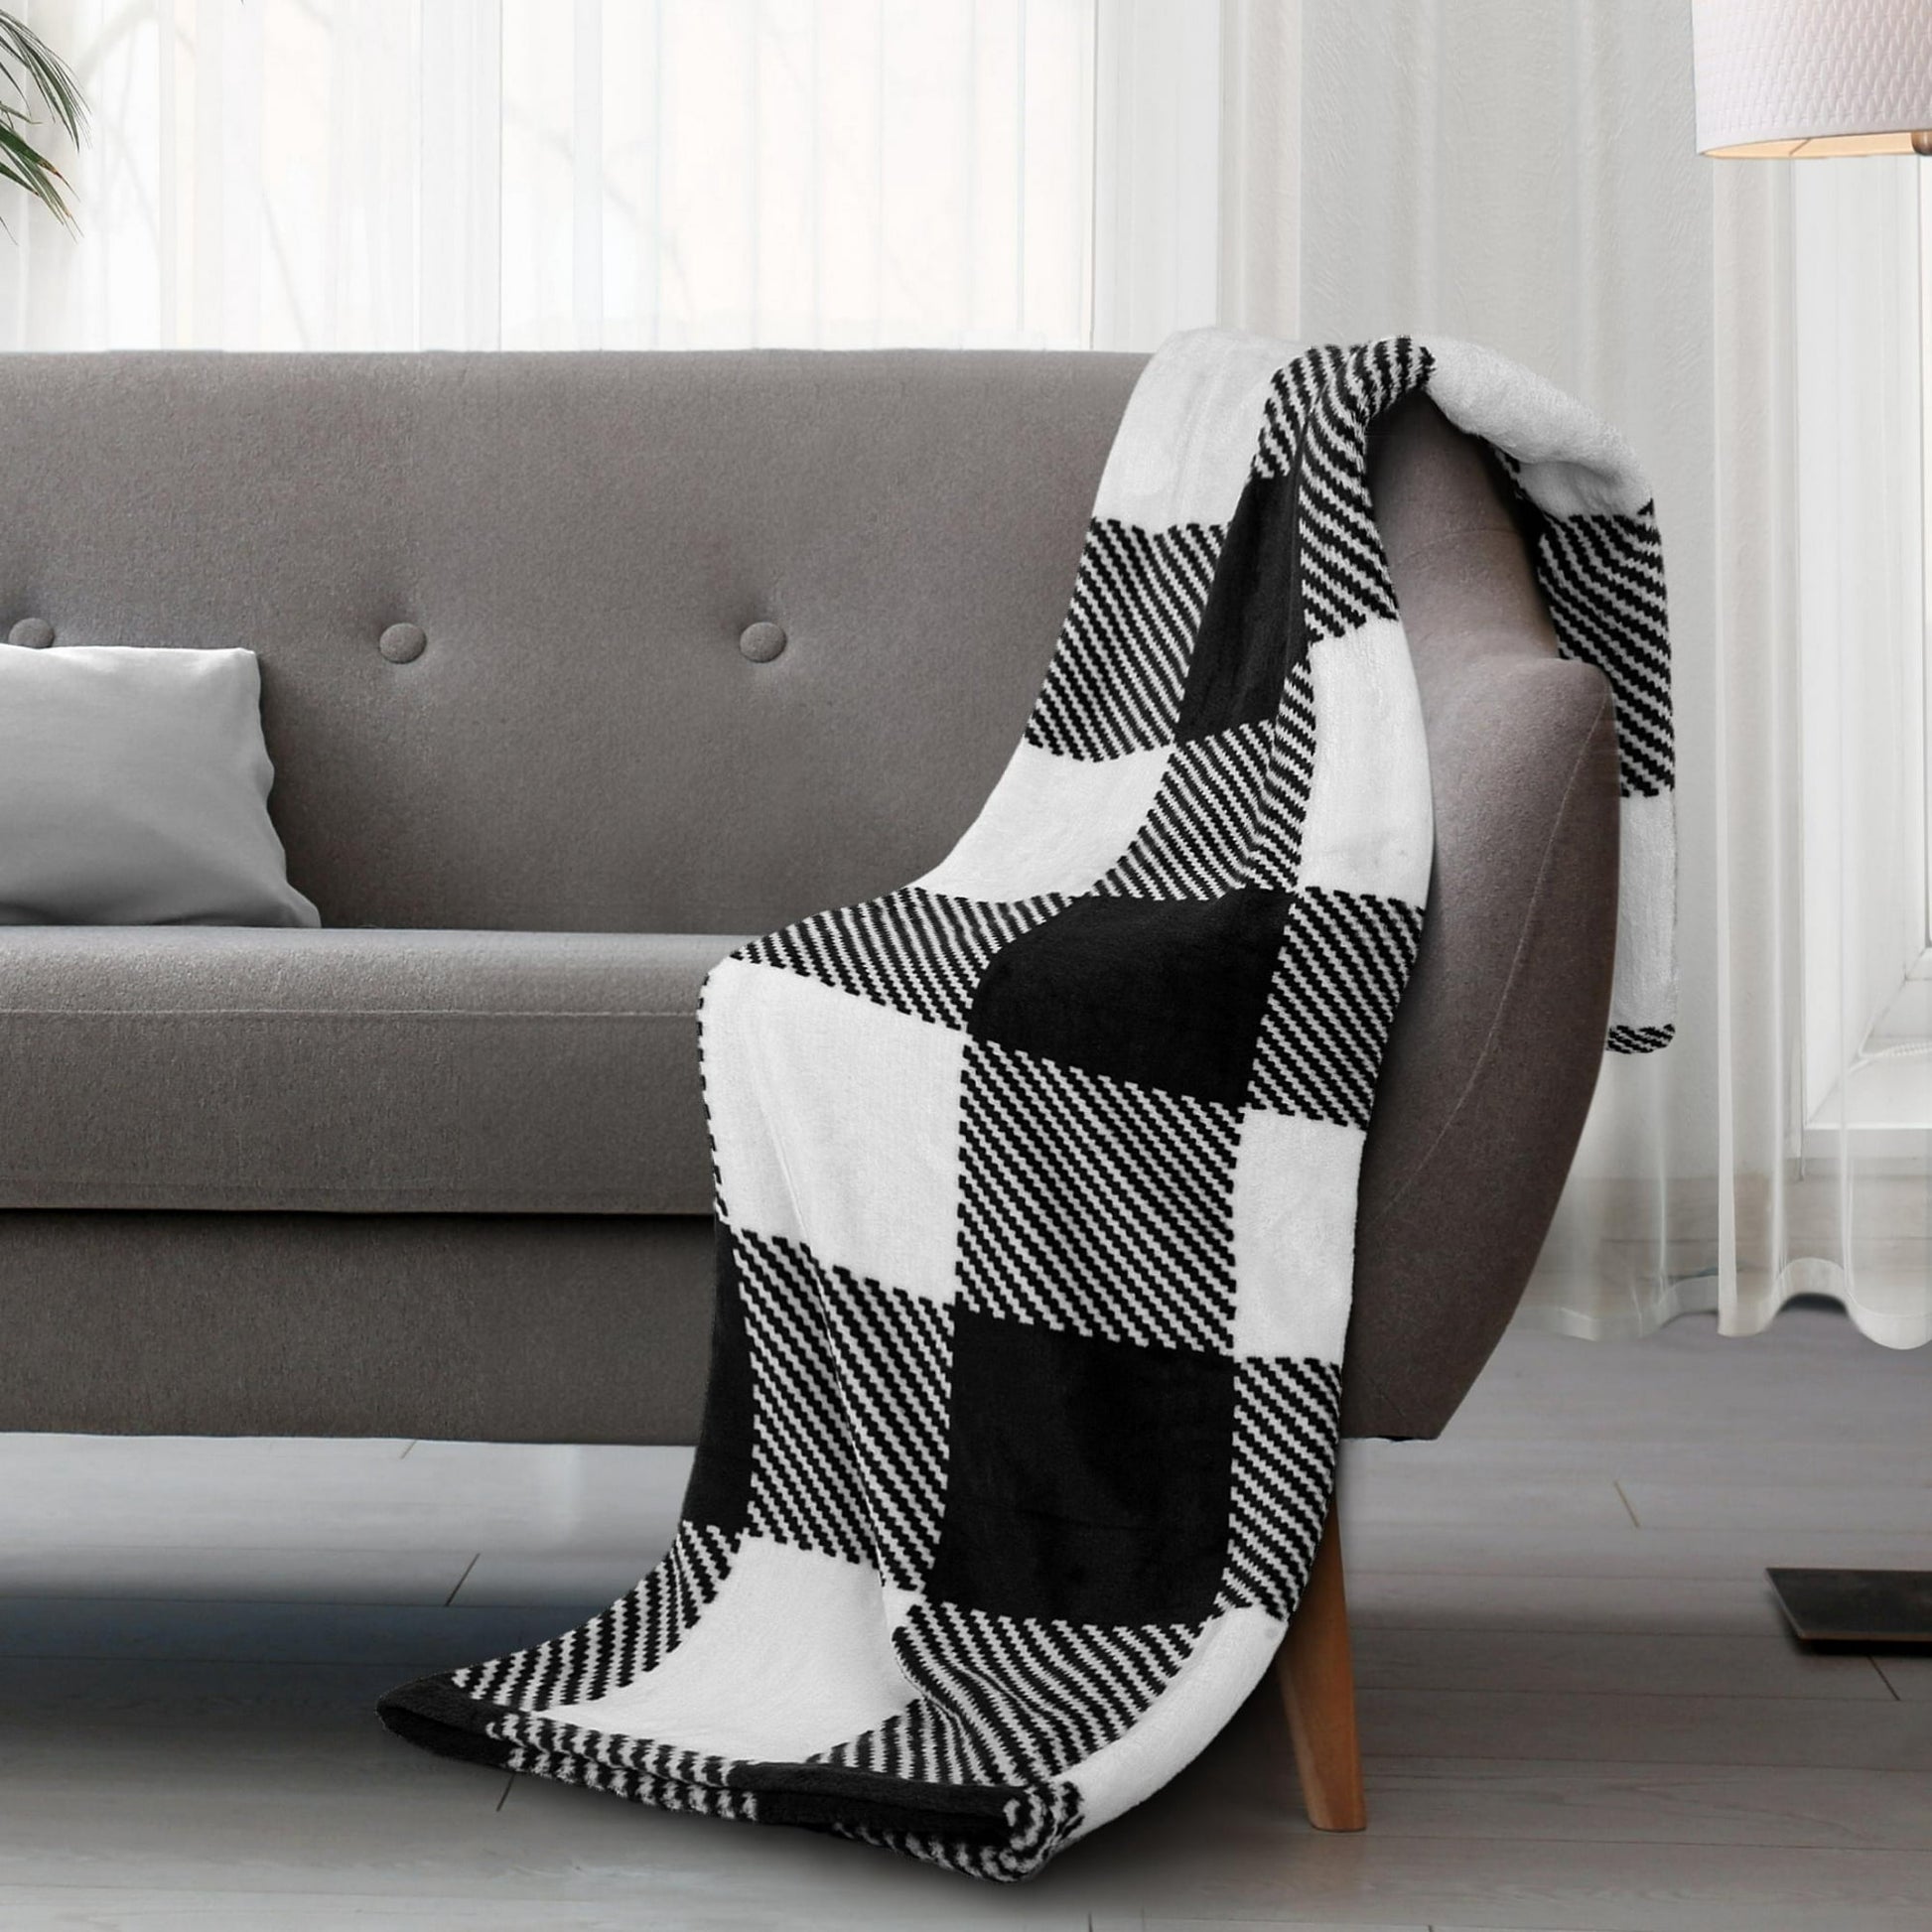 Throw Blanket with Black and White Geometric Design